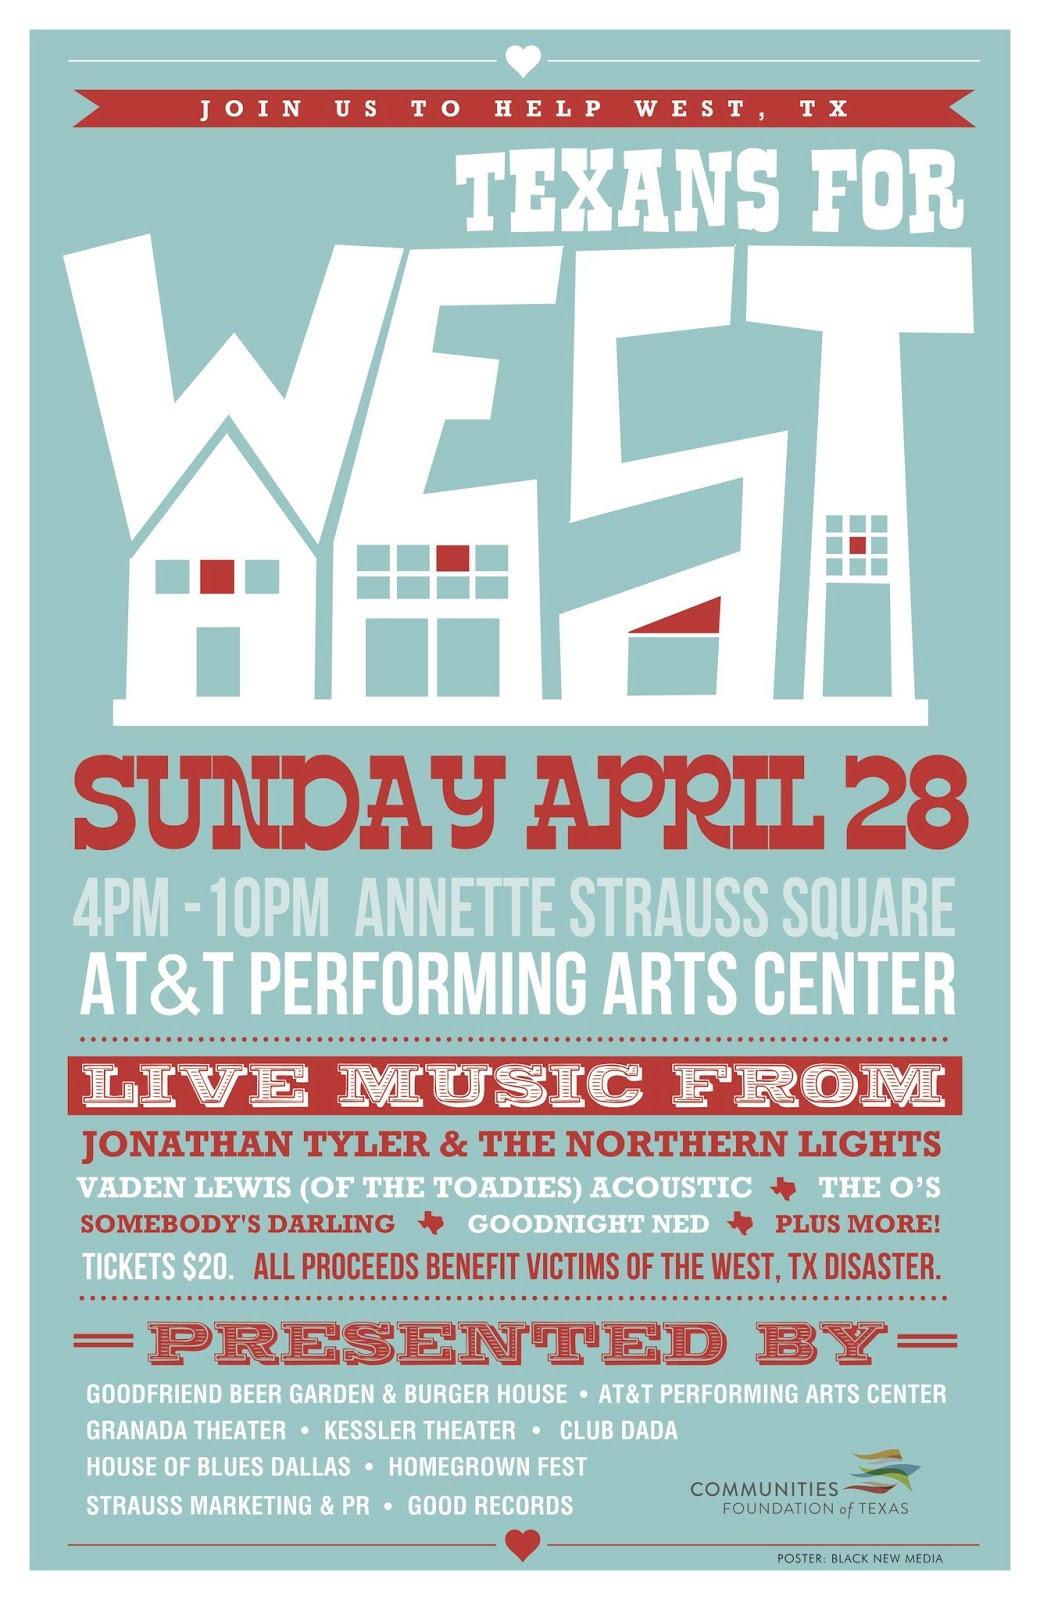 Support the Texans For West benefit concert